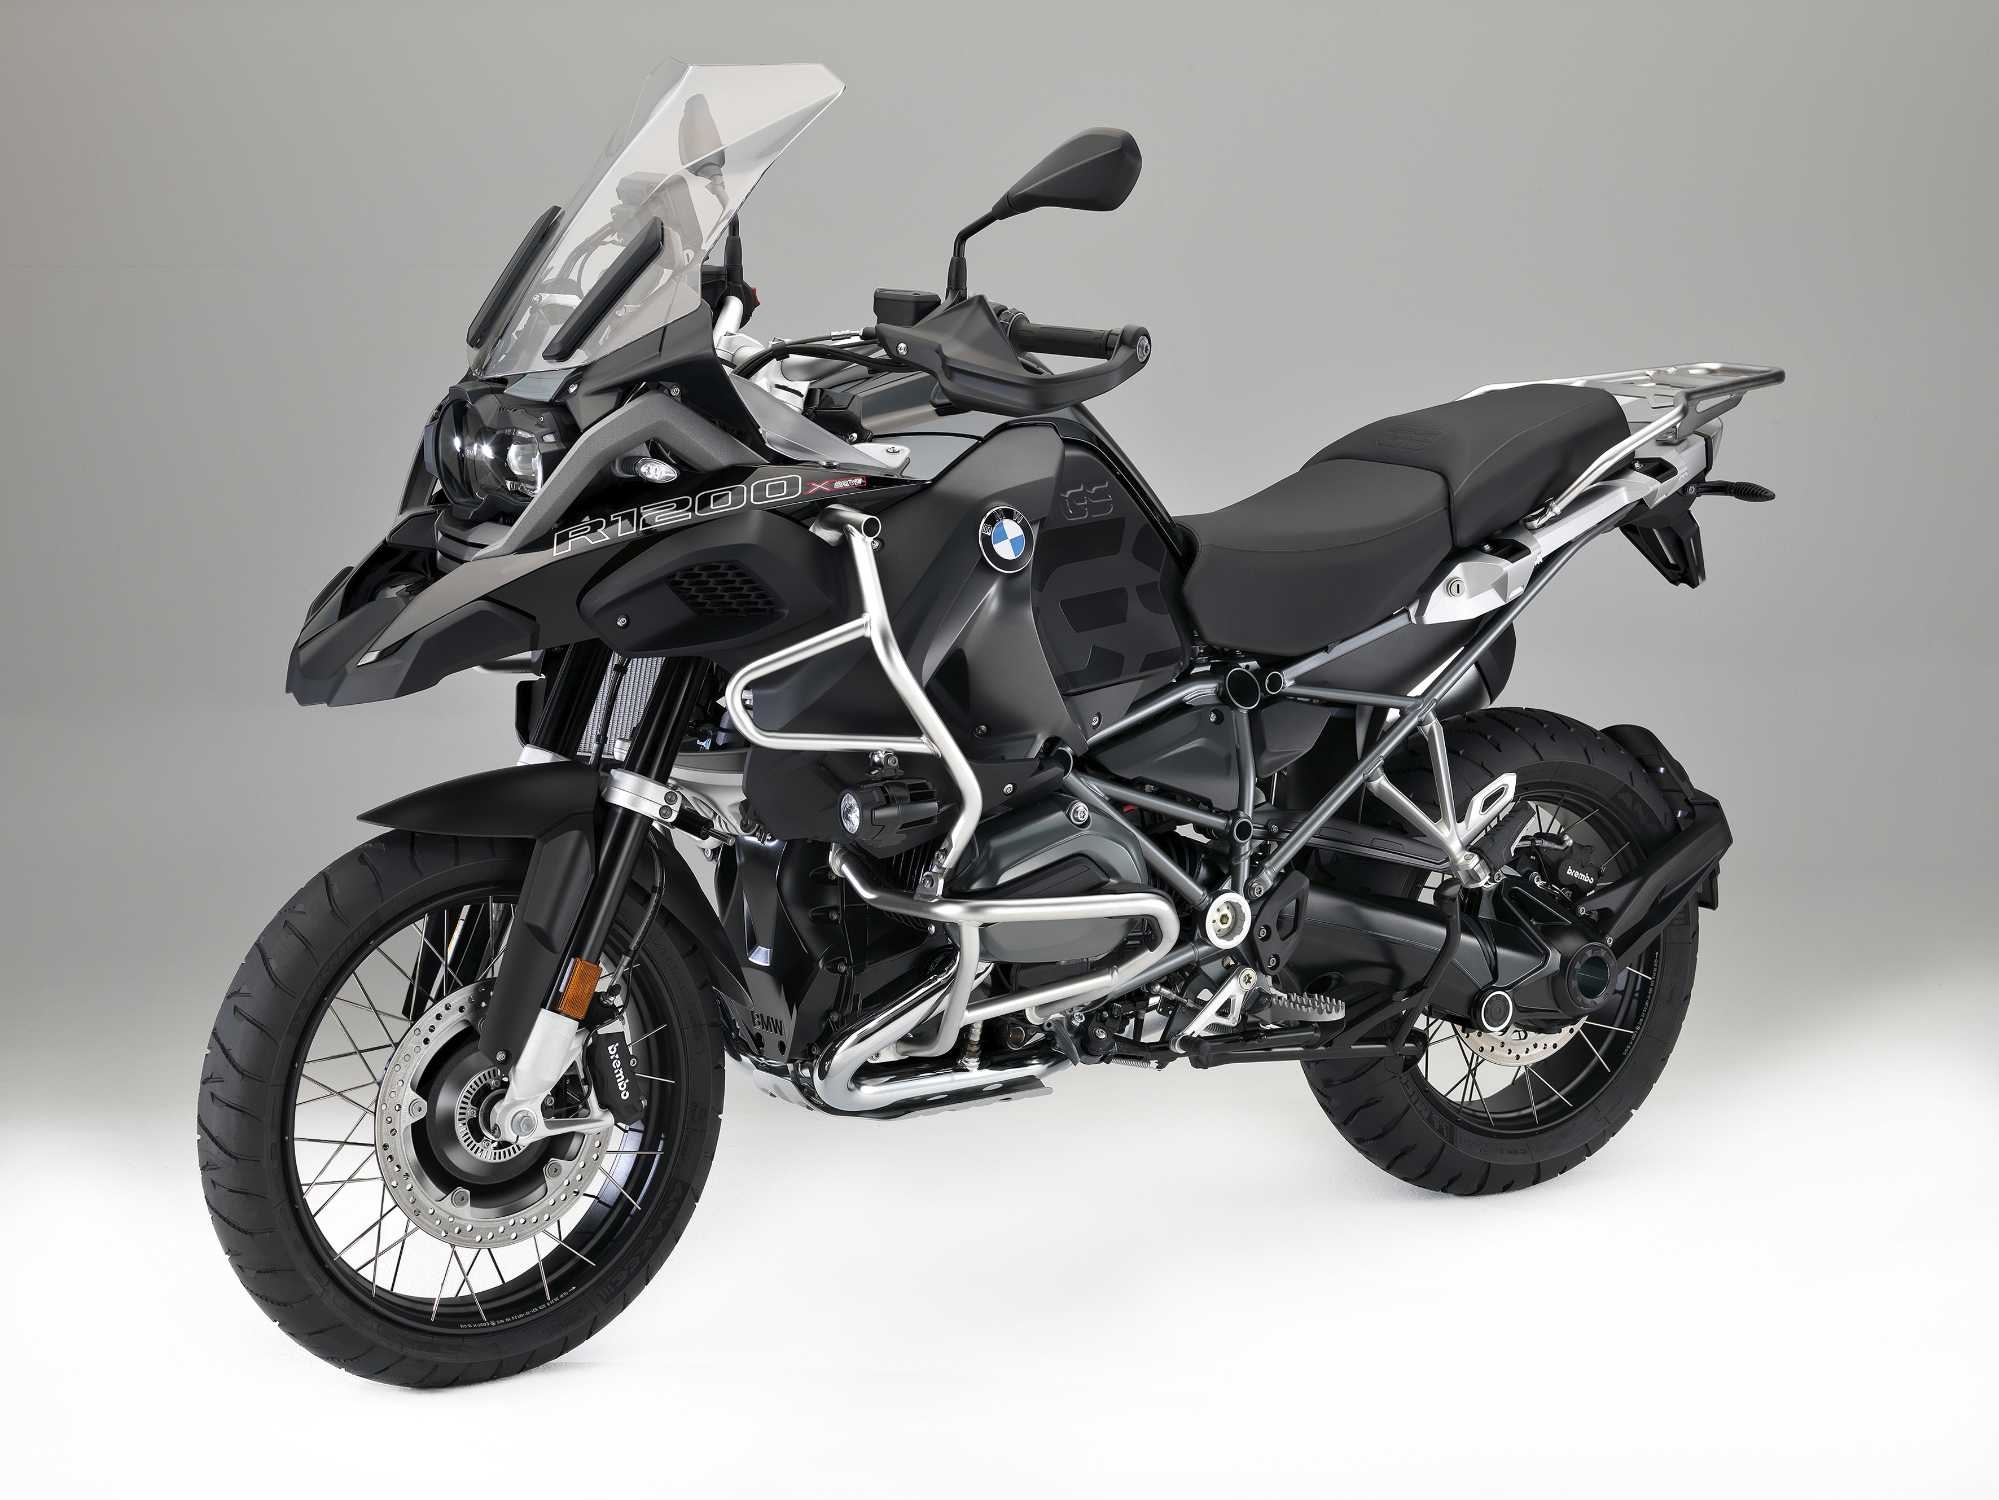 BMW R 1200 GS Side View Official Promotional Image